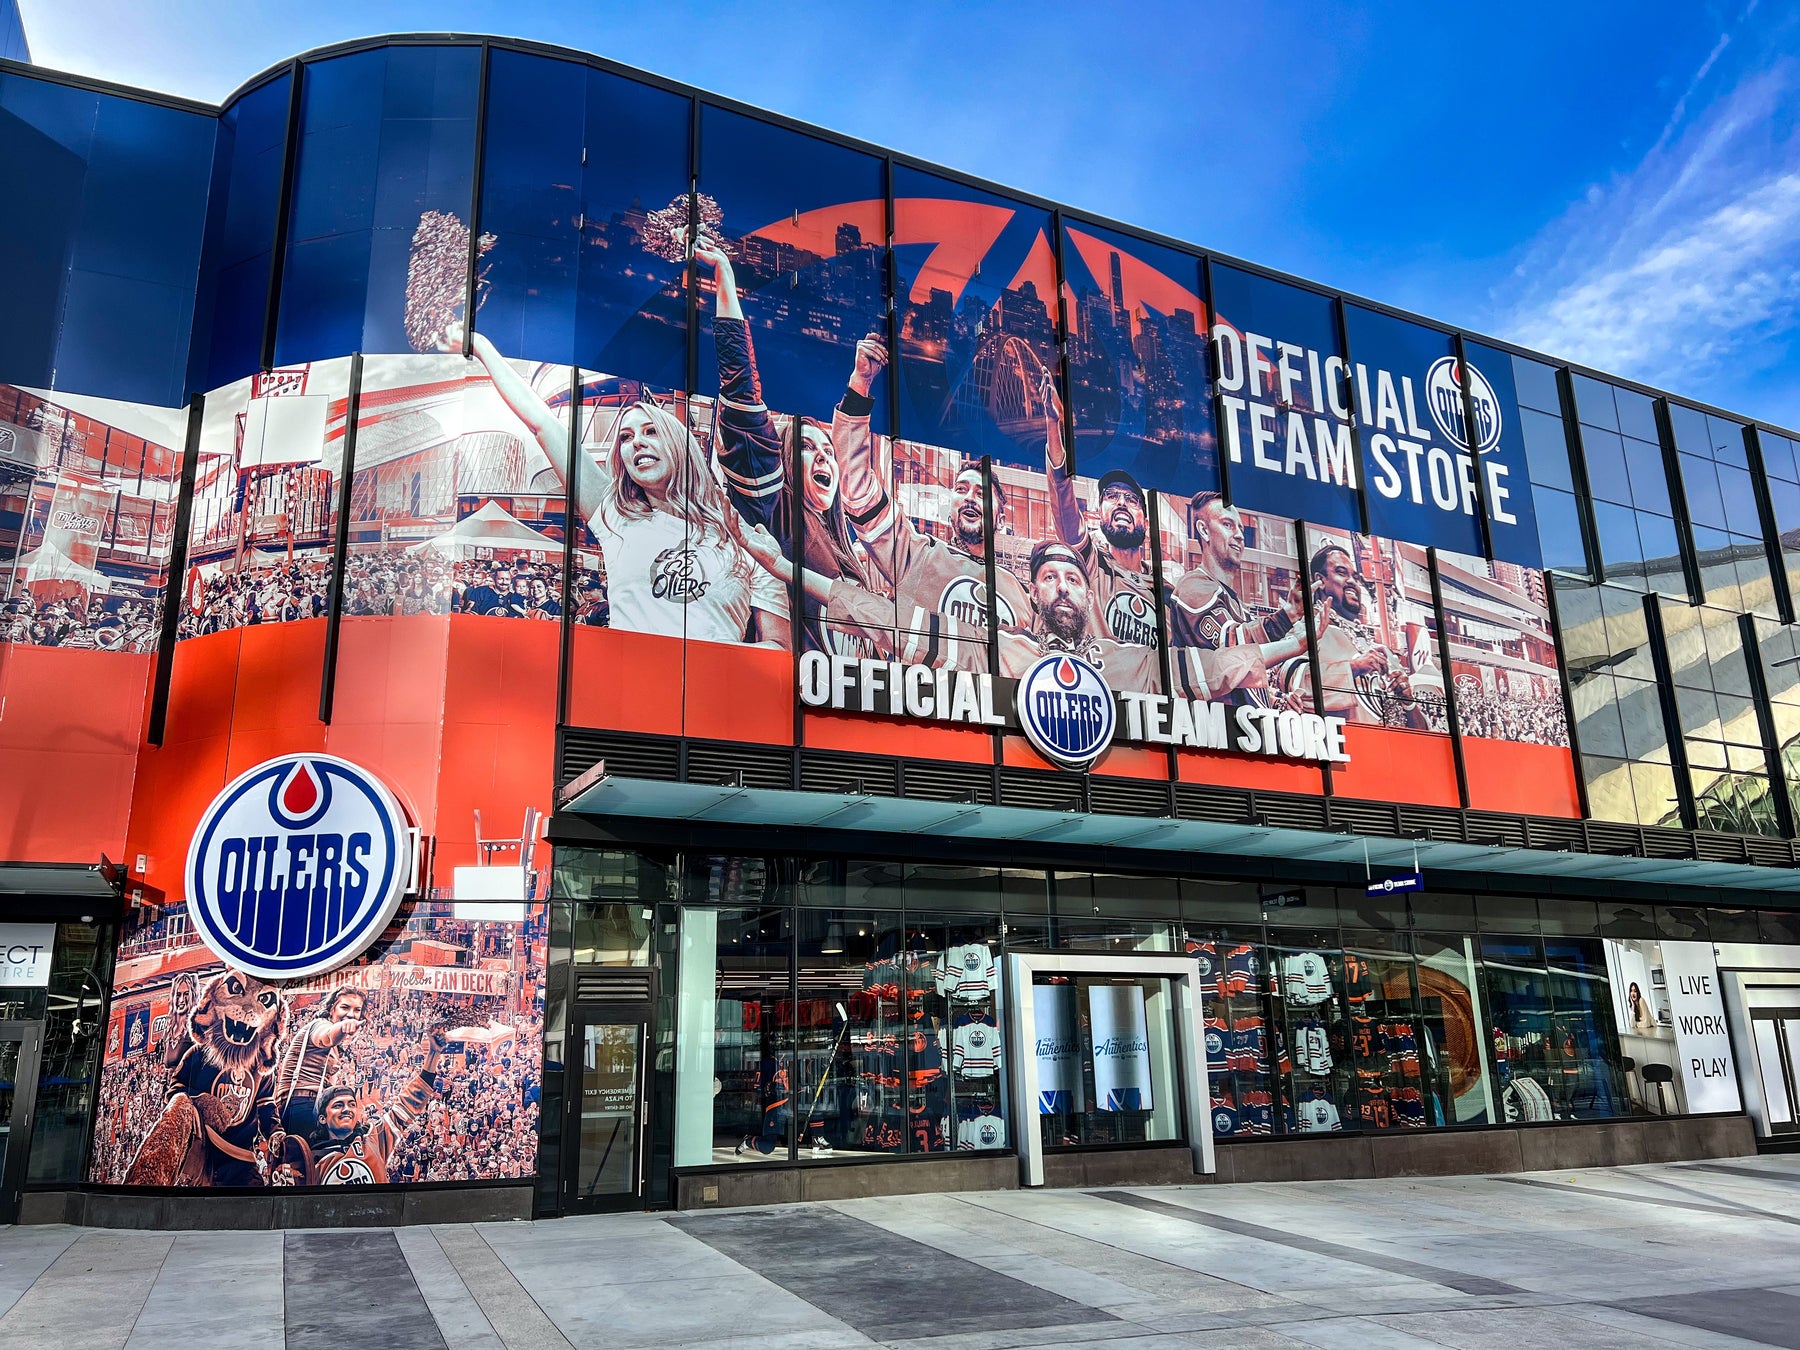 Oilers merch is selling fast and many stores in Edmonton are out